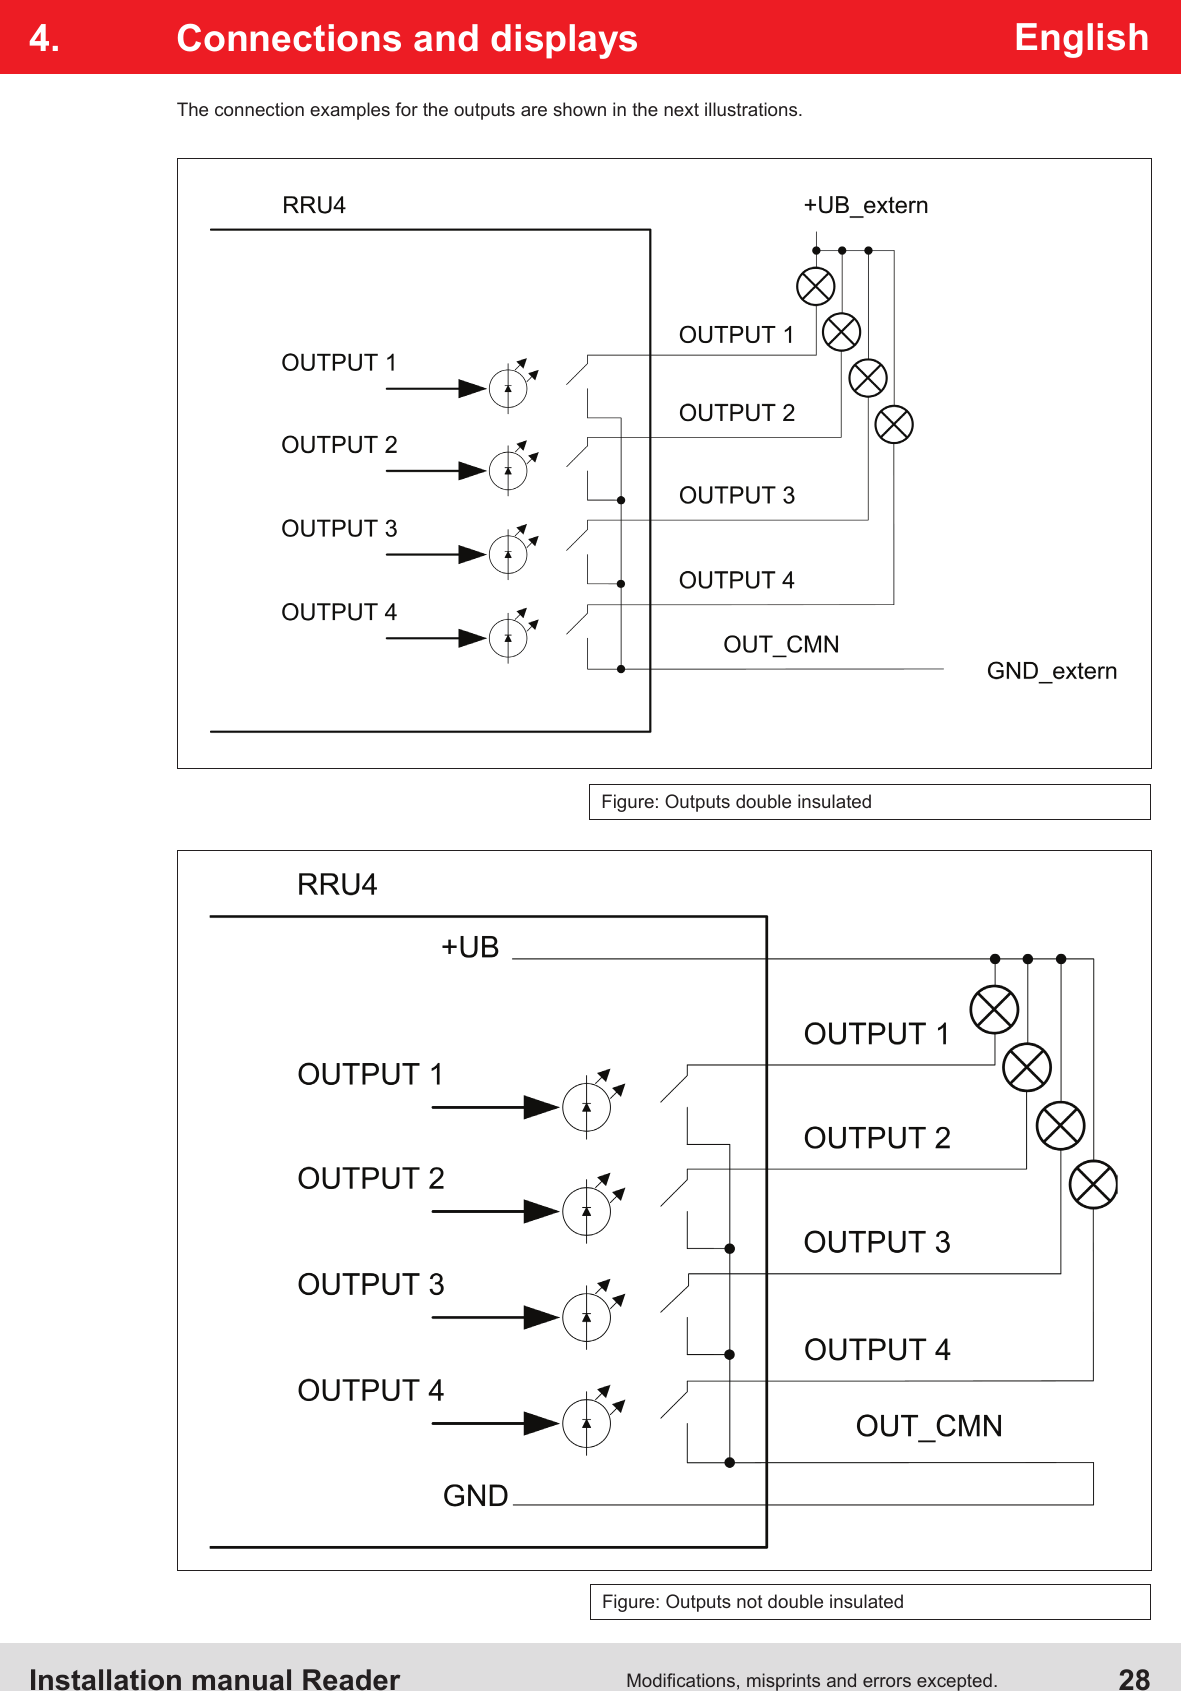 Installation manual Reader  28Modications, misprints and errors excepted.English4.  Connections and displaysThe connection examples for the outputs are shown in the next illustrations.Figure: Outputs double insulatedFigure: Outputs not double insulated